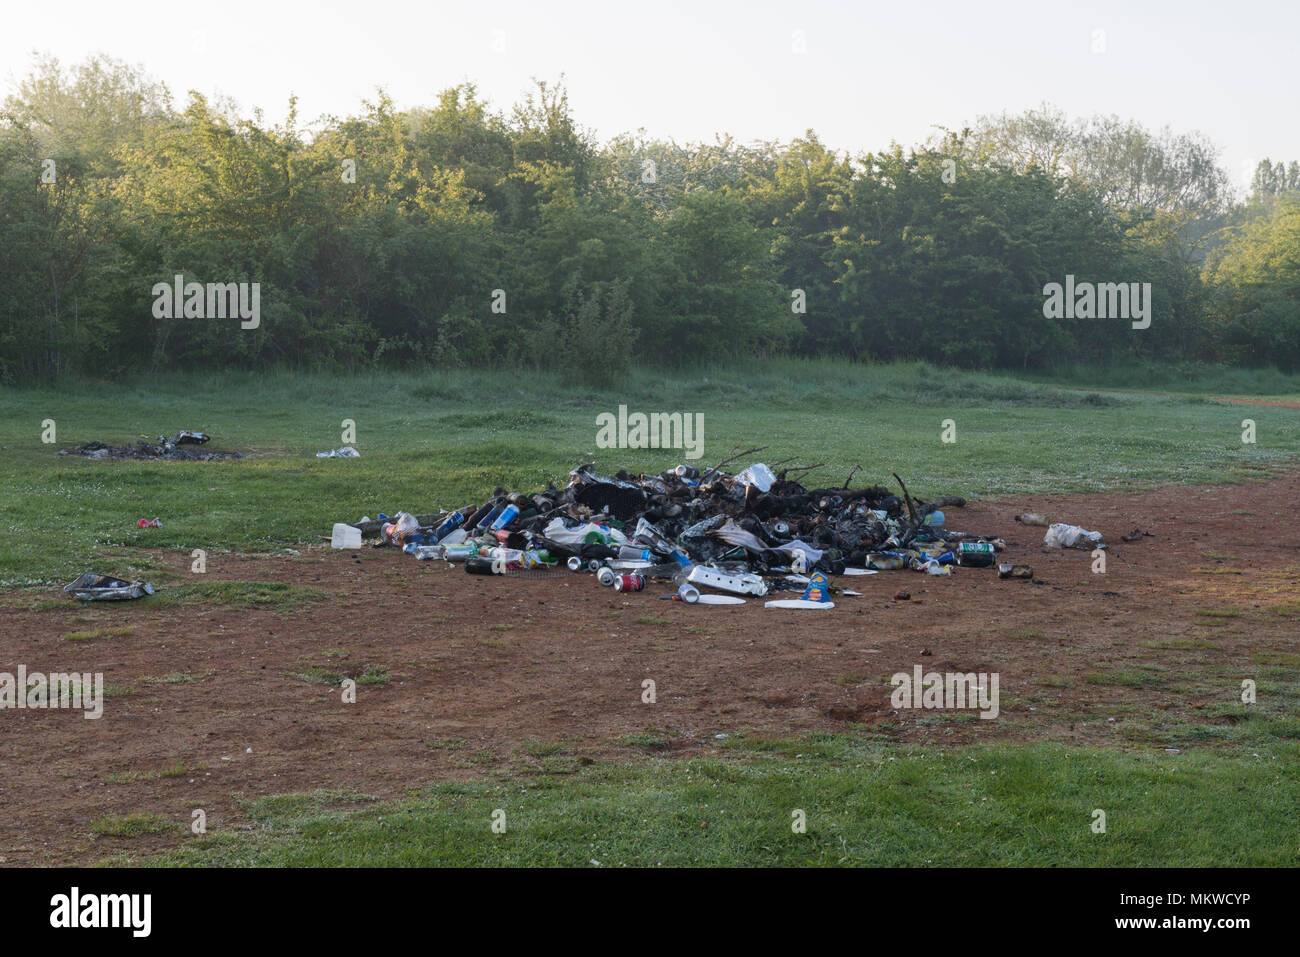 Rubbish and litter left behind after a May Day Bank Holiday at Blue Lagoon Nature Reserve, Bletchley, Bucks. Image taken on 8th May 2018 Stock Photo